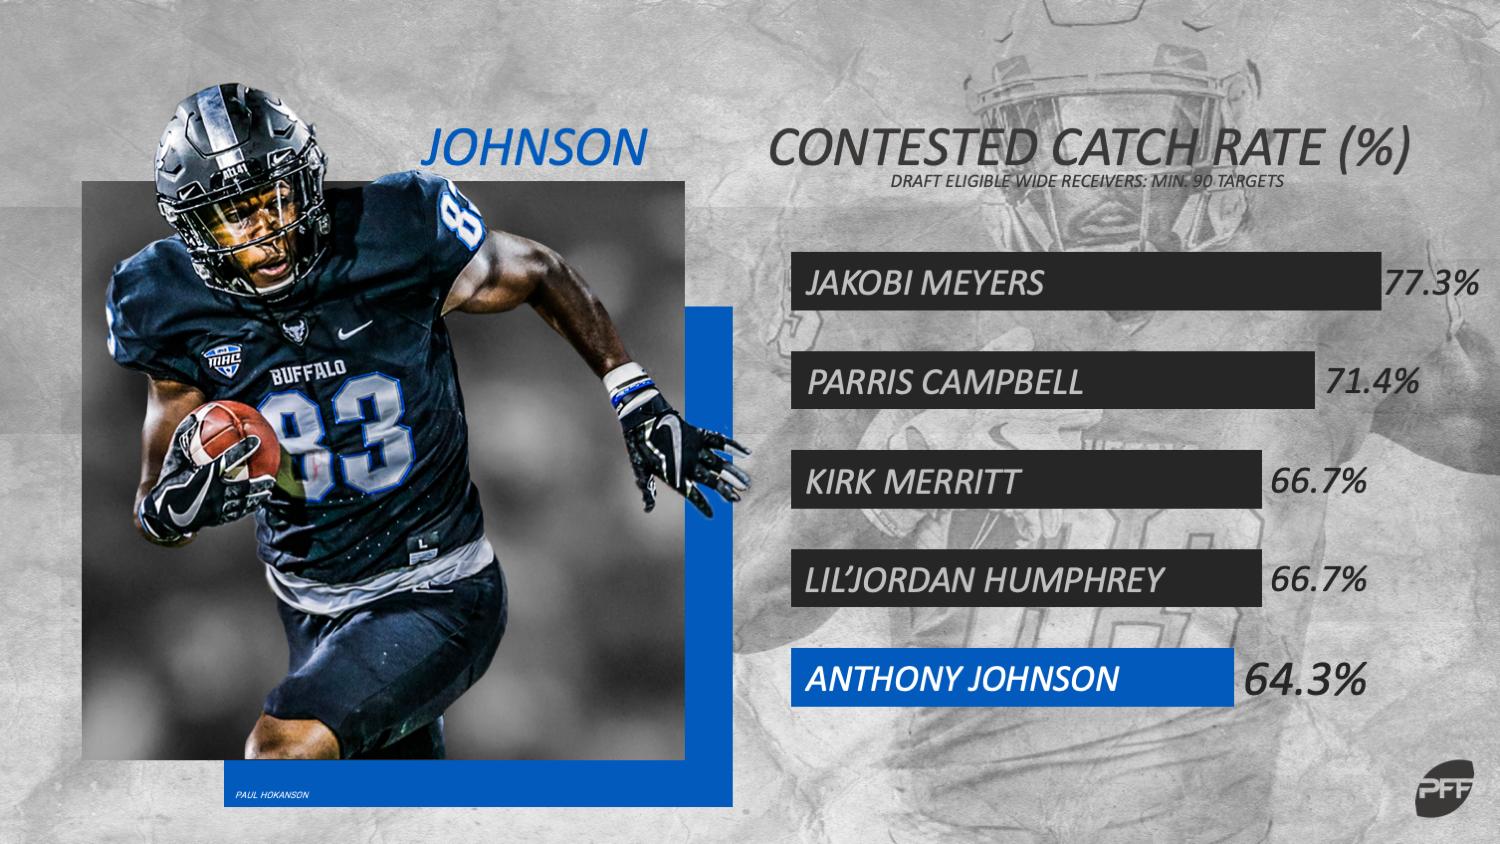 on Twitter: "Buffalo WR Anthony Johnson ranked fifth in contested catch rate among qualified draft-eligible WRs. He can make catches and proves just how deep the 2019 NFL Draft